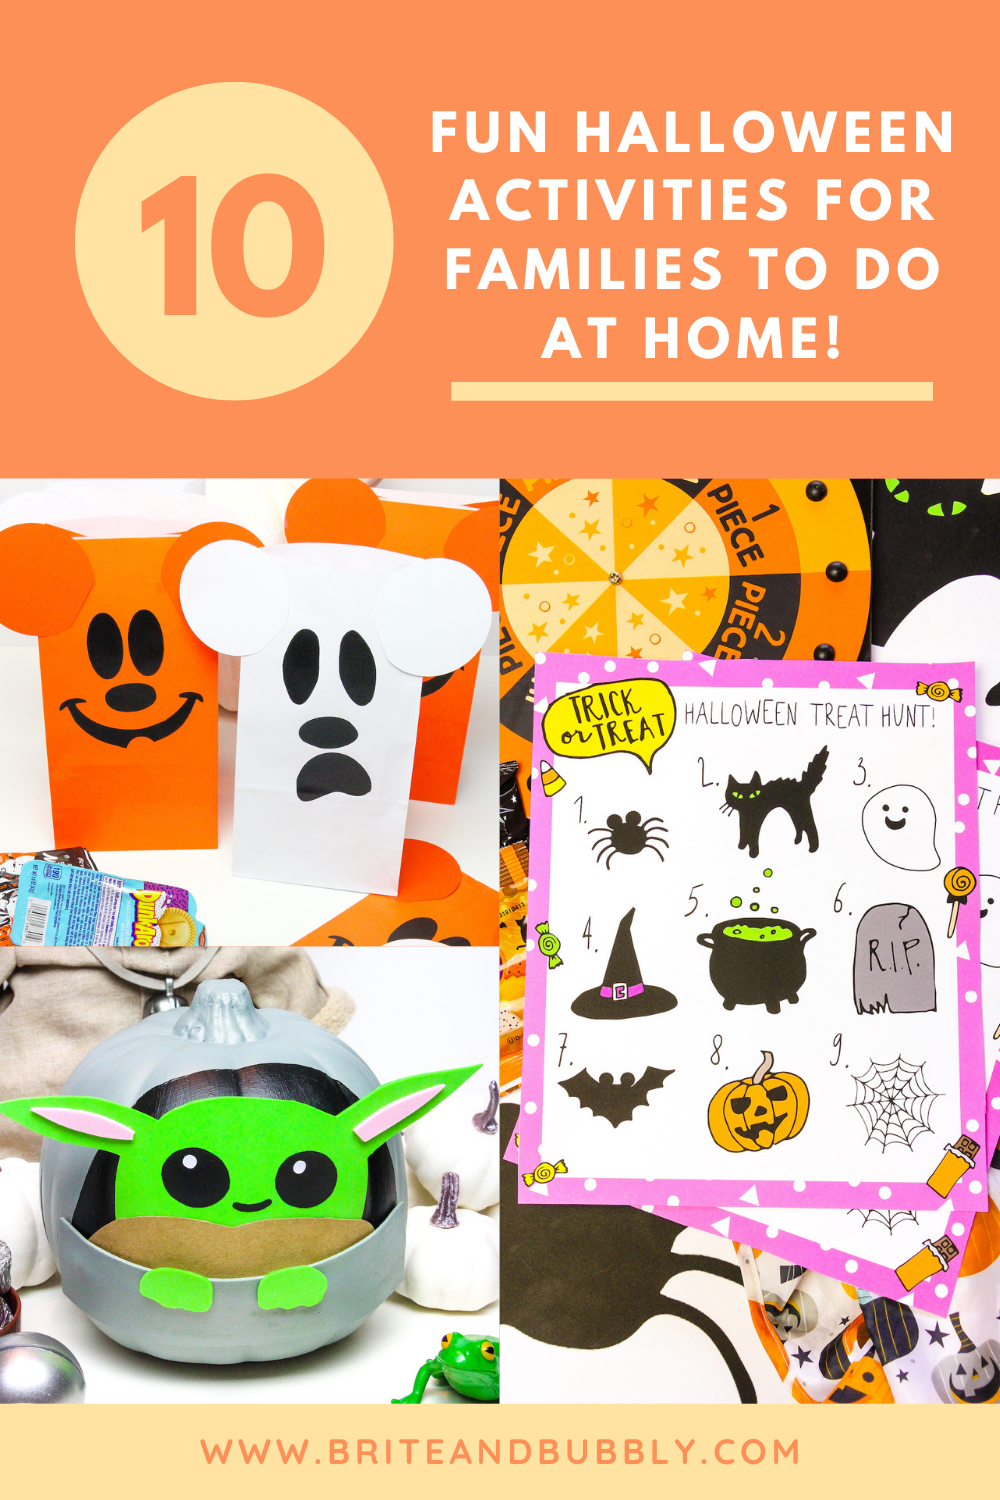 10 Fun Halloween Activities For Families To Do At Home! ⋆ Brite and Bubbly